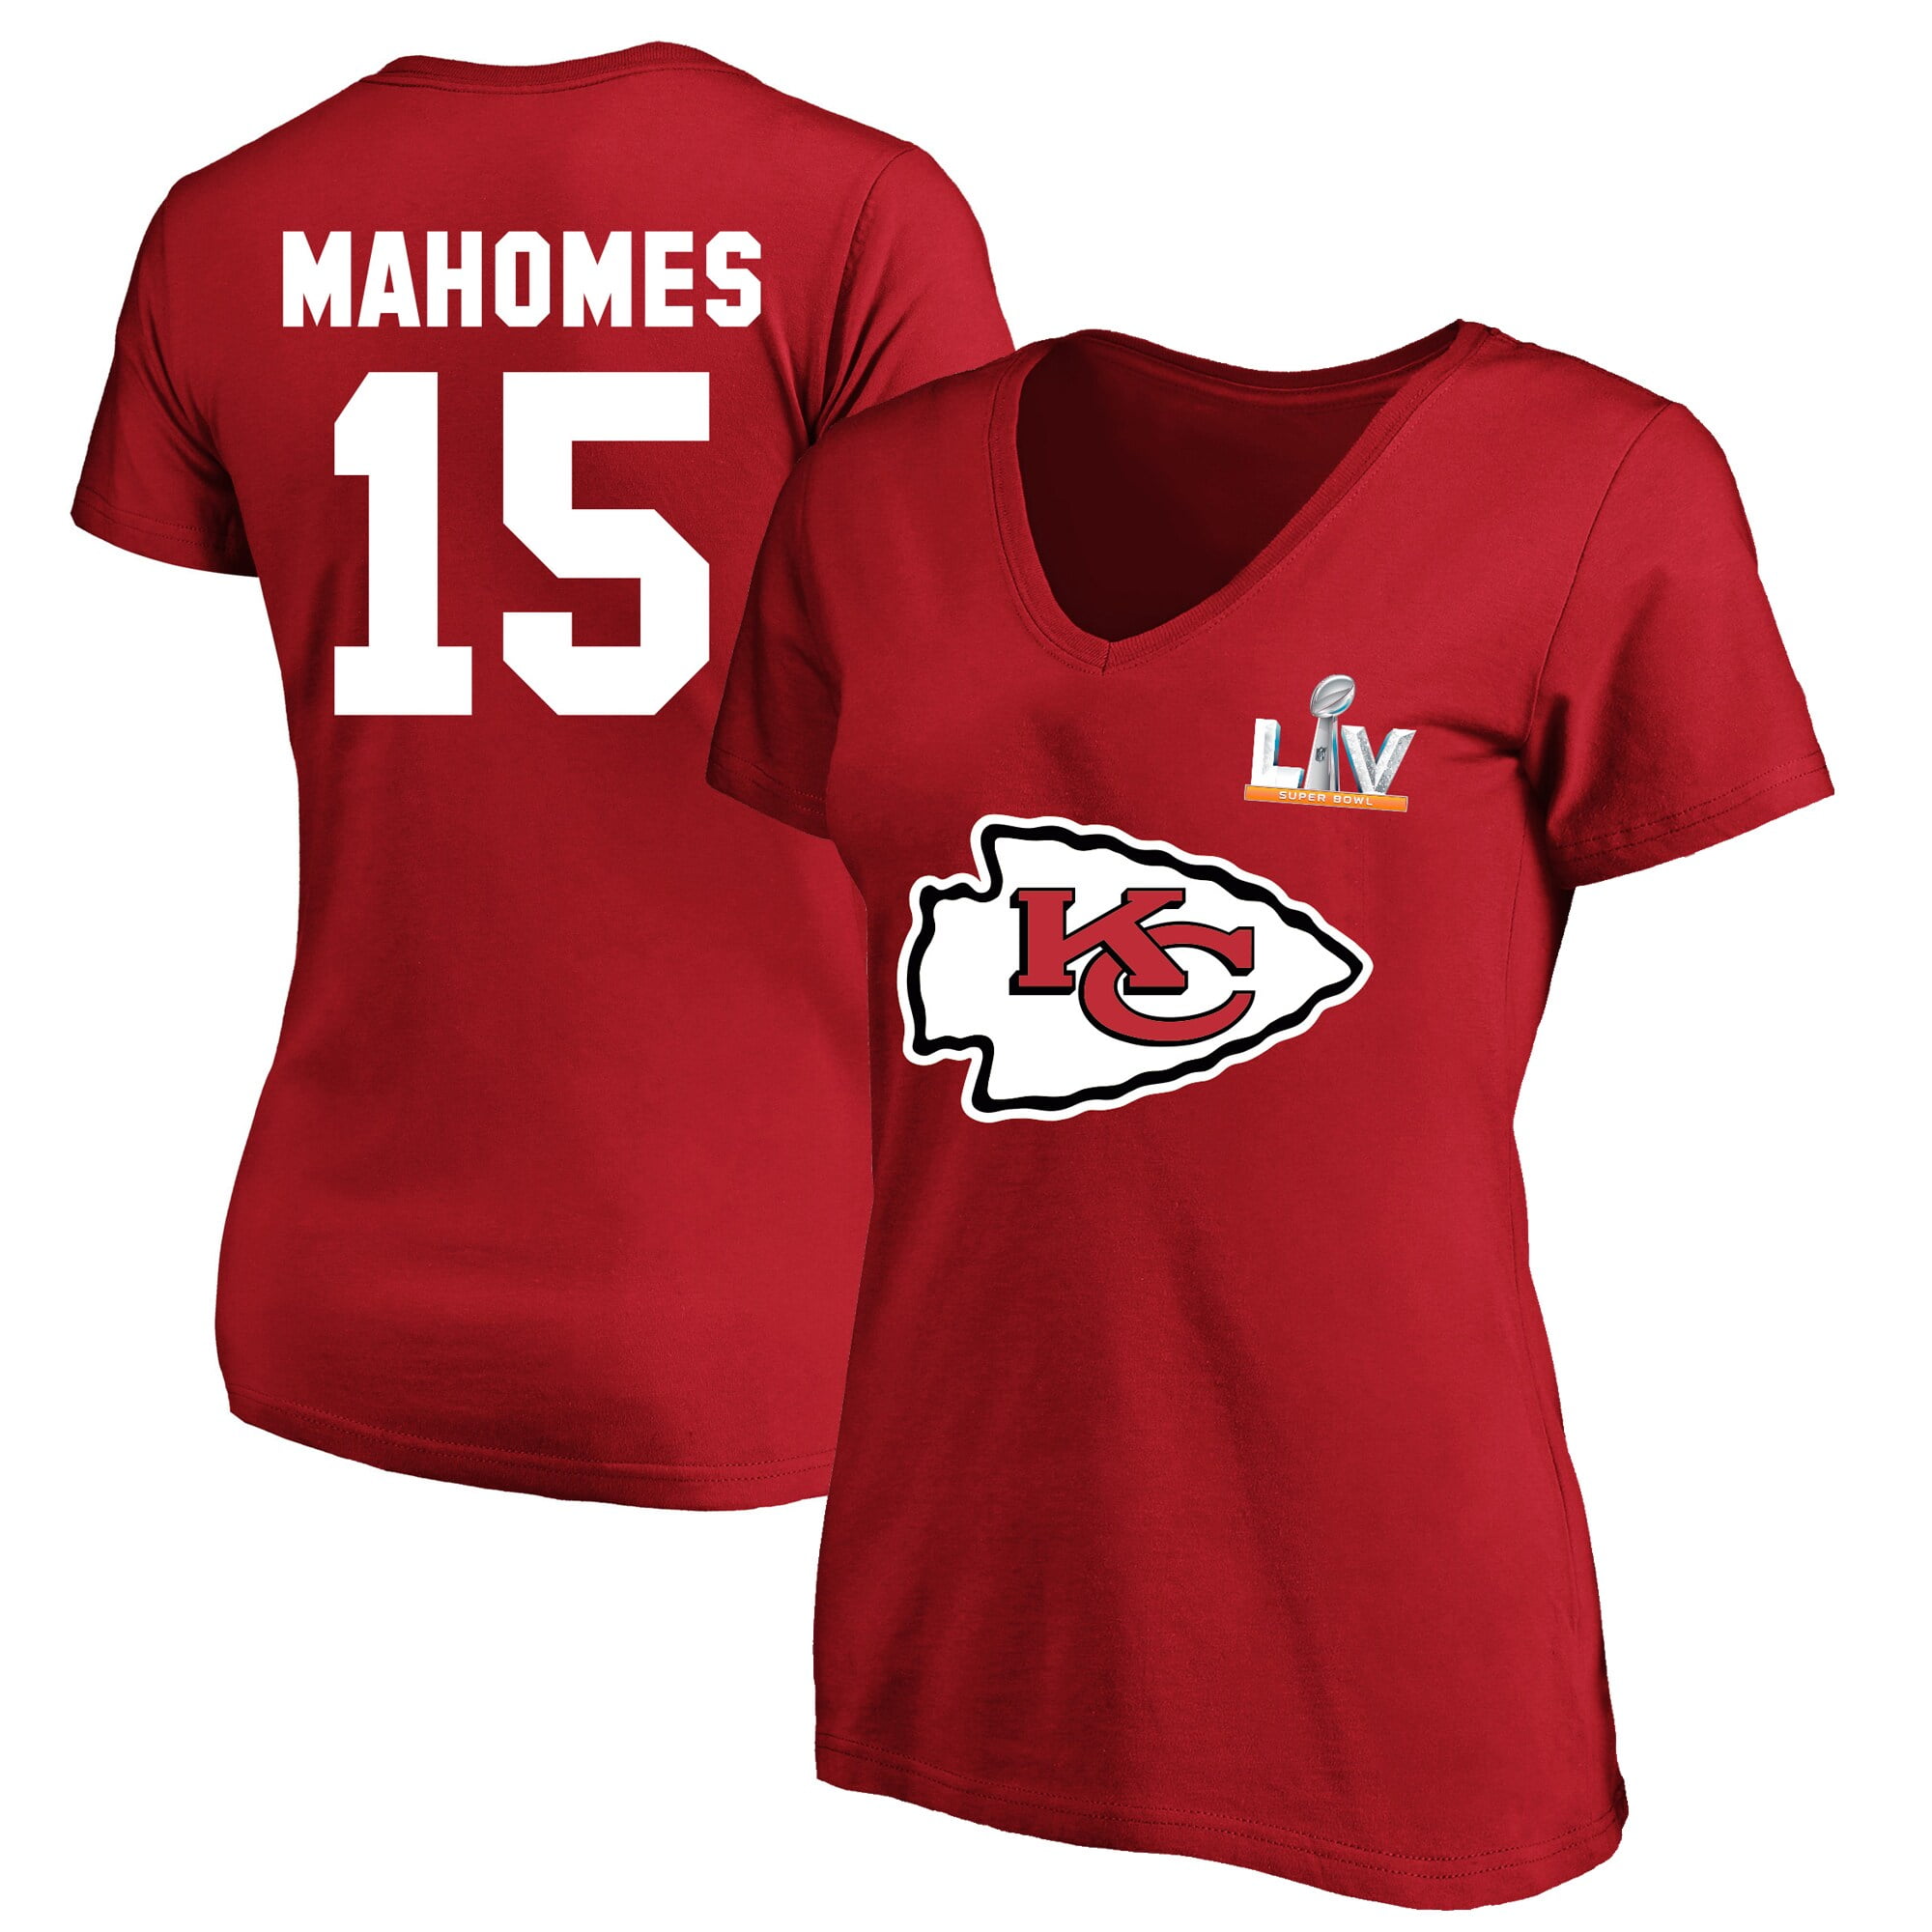 patrick mahomes jersey for sale